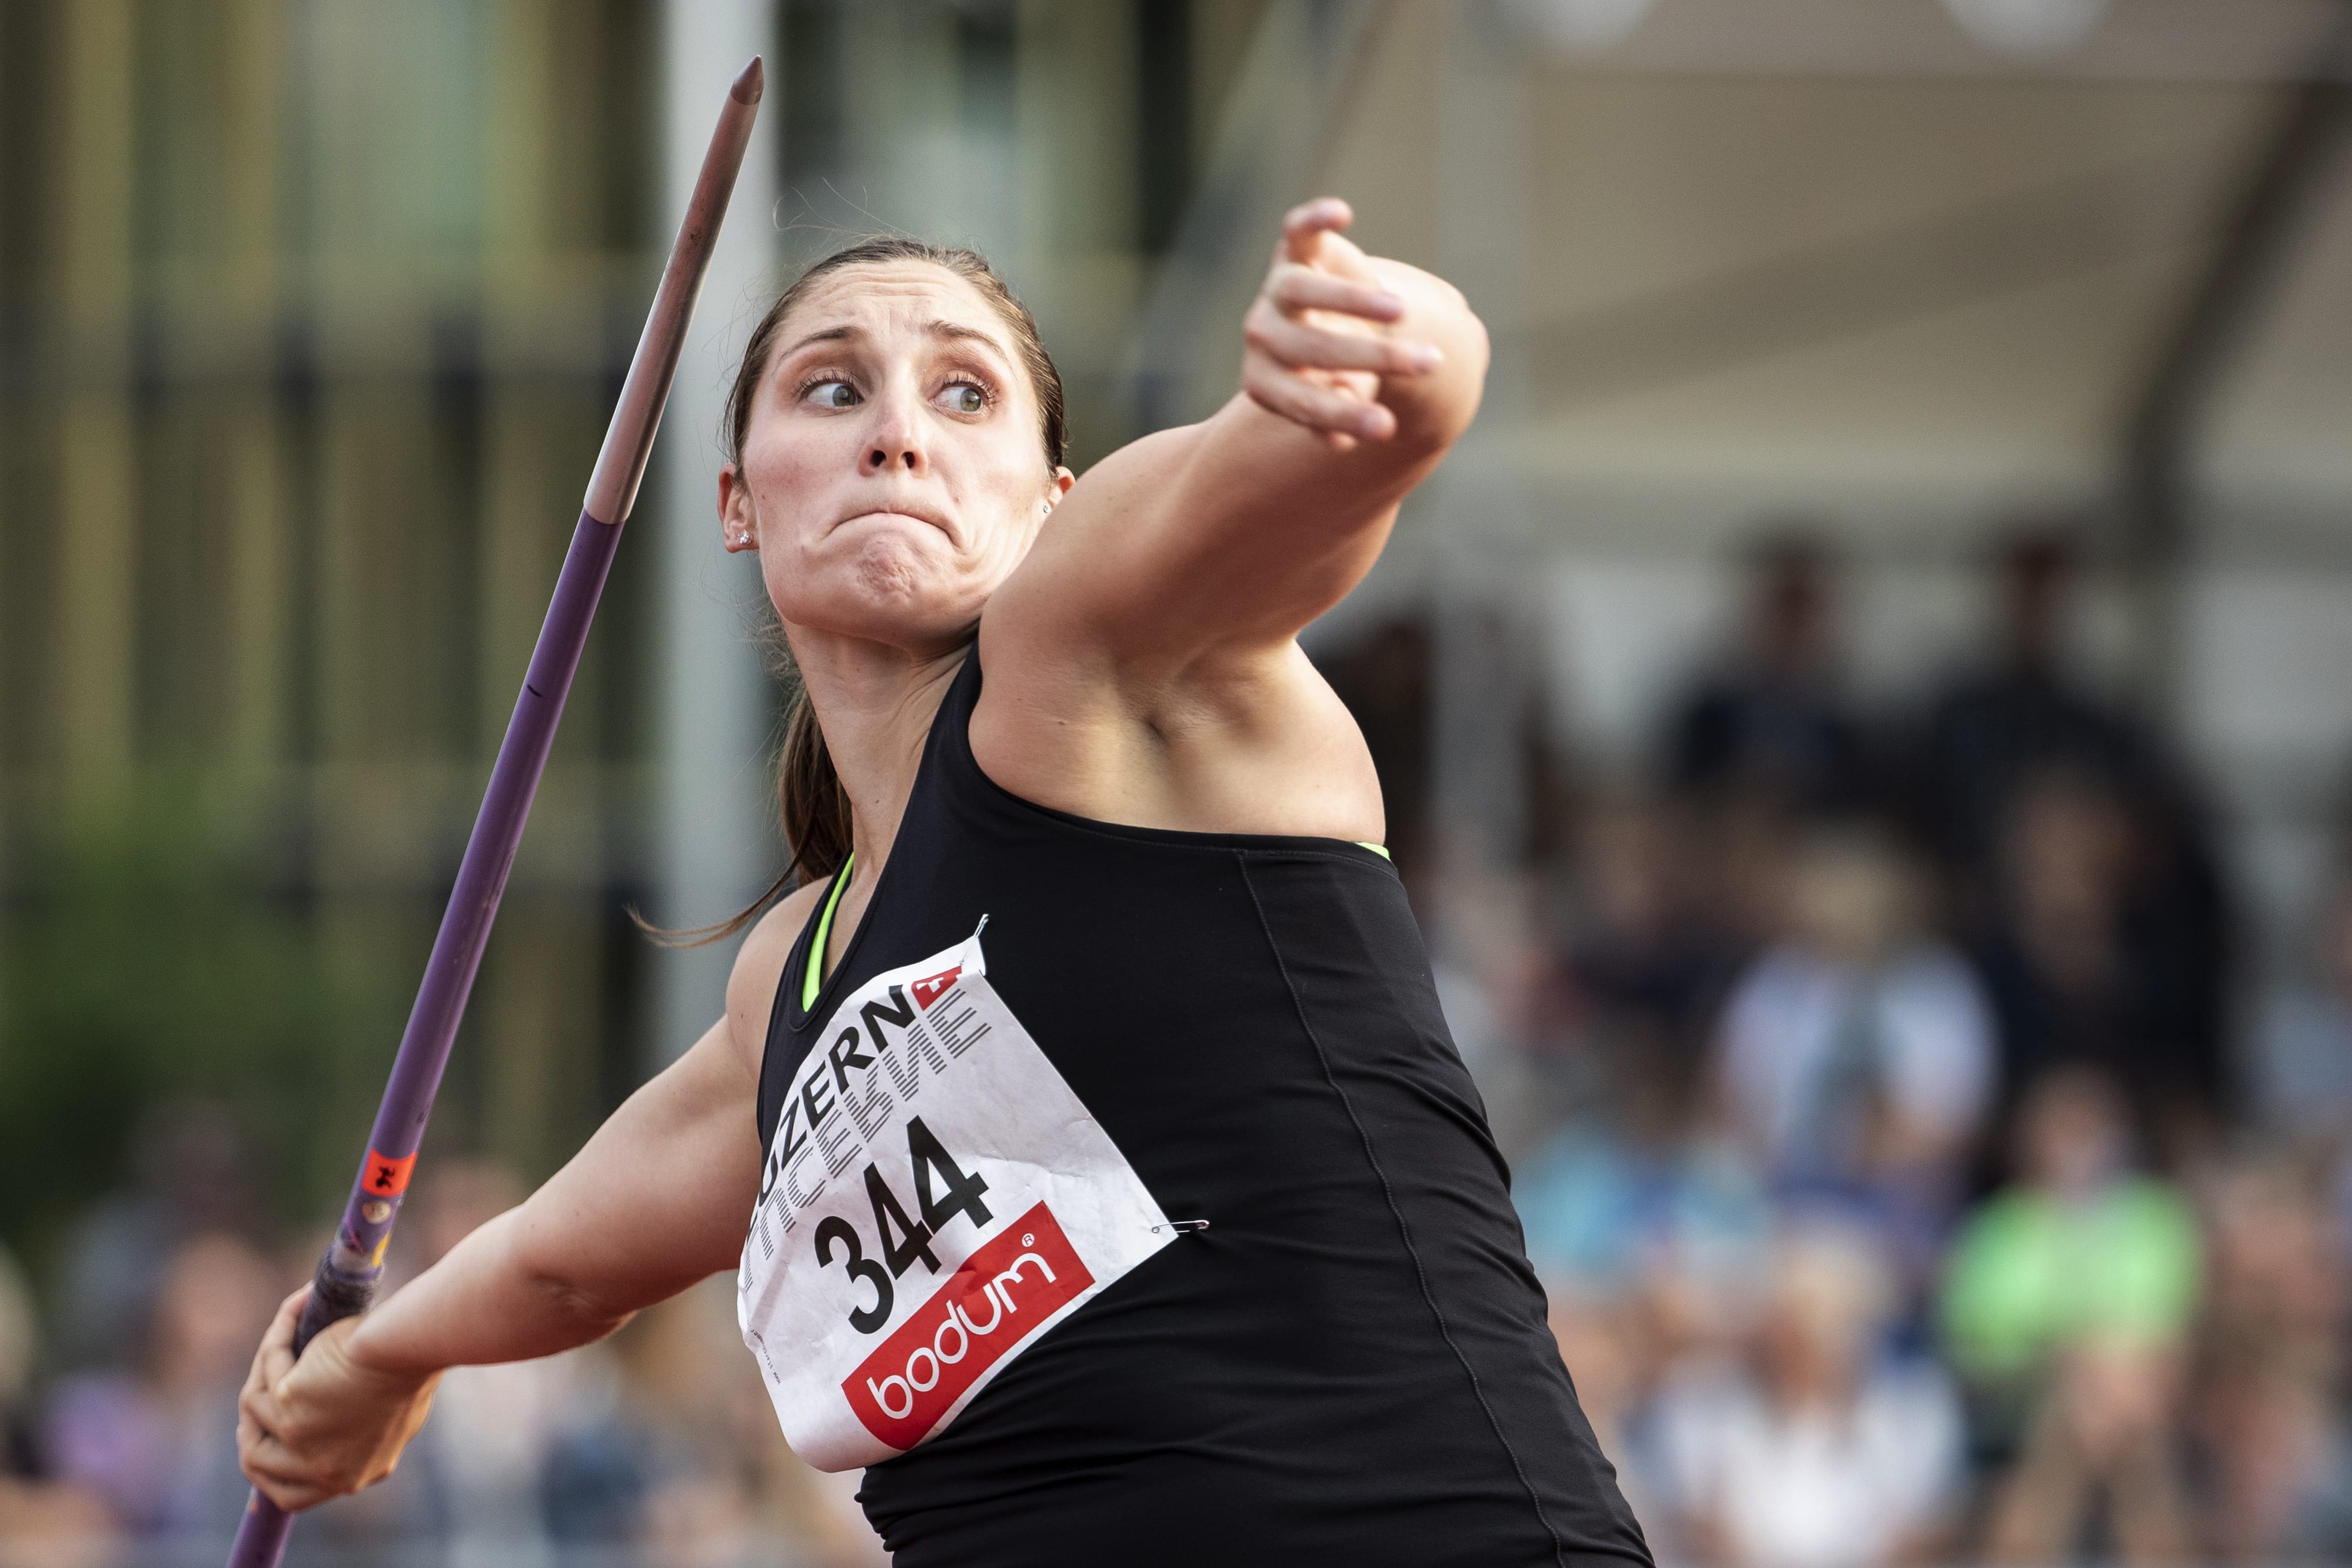 Kara Winger of the United States competes in the women's javelin event at the International Athletics Meeting in Lucerne, Switzerland, on Tuesday, July 9, 2019.